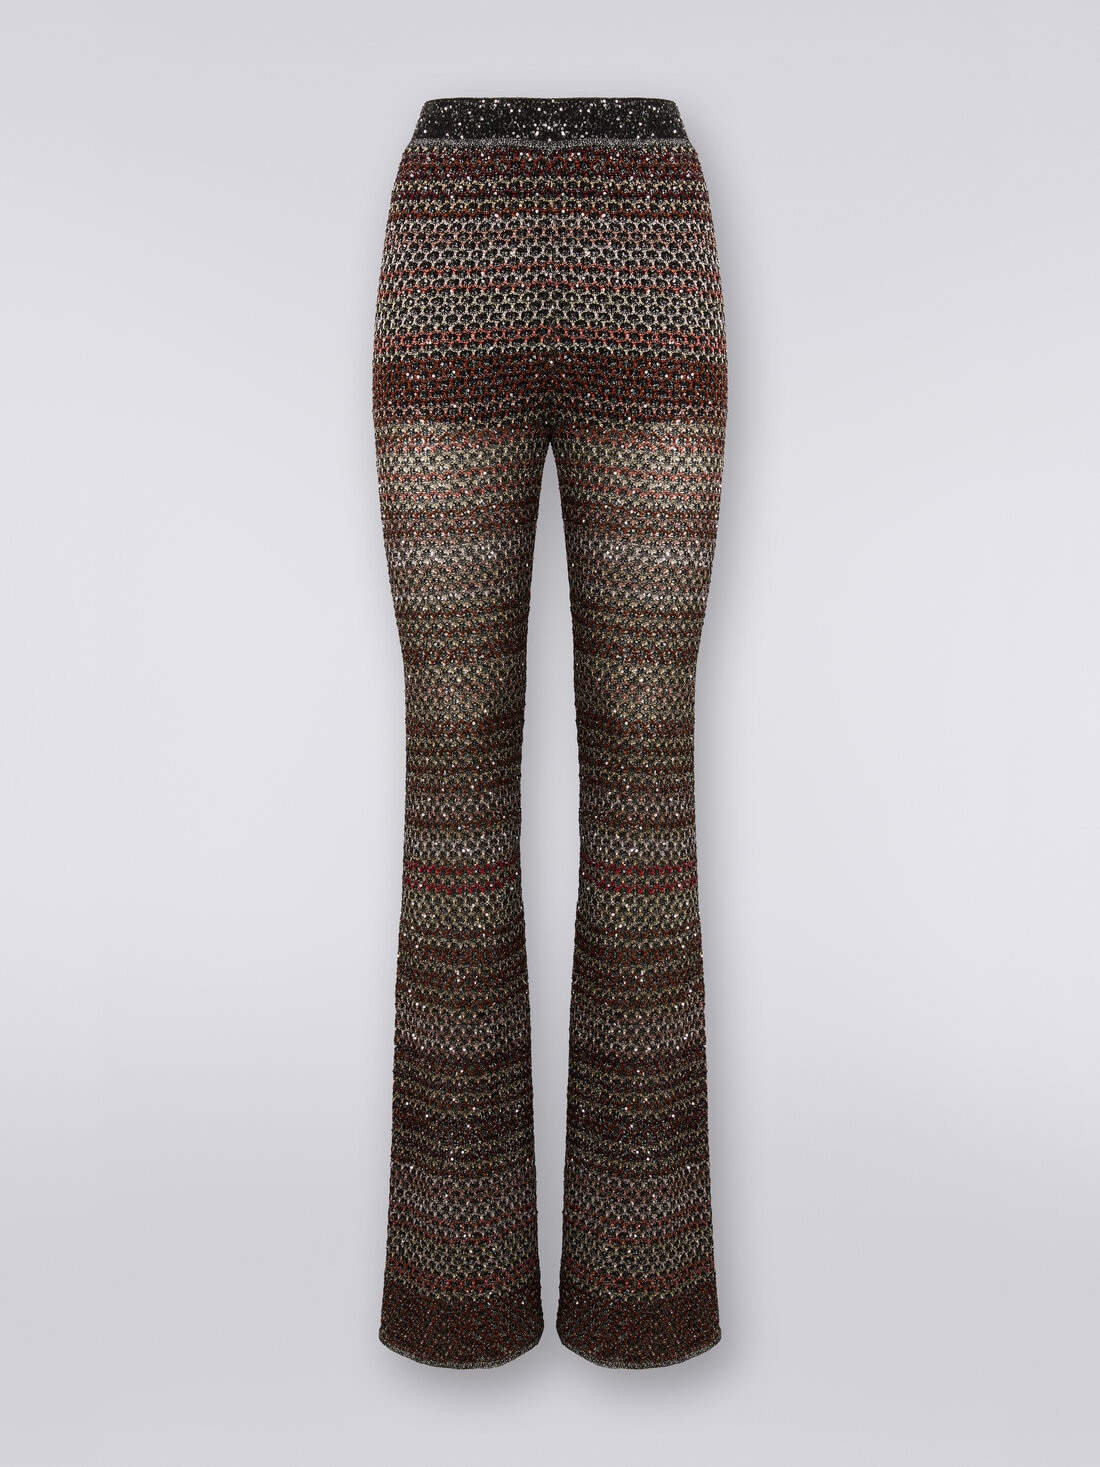 Trousers in mesh knit with sequin appliqué  , Multicoloured  - DS24SI0JBK033PSM9AJ - 0